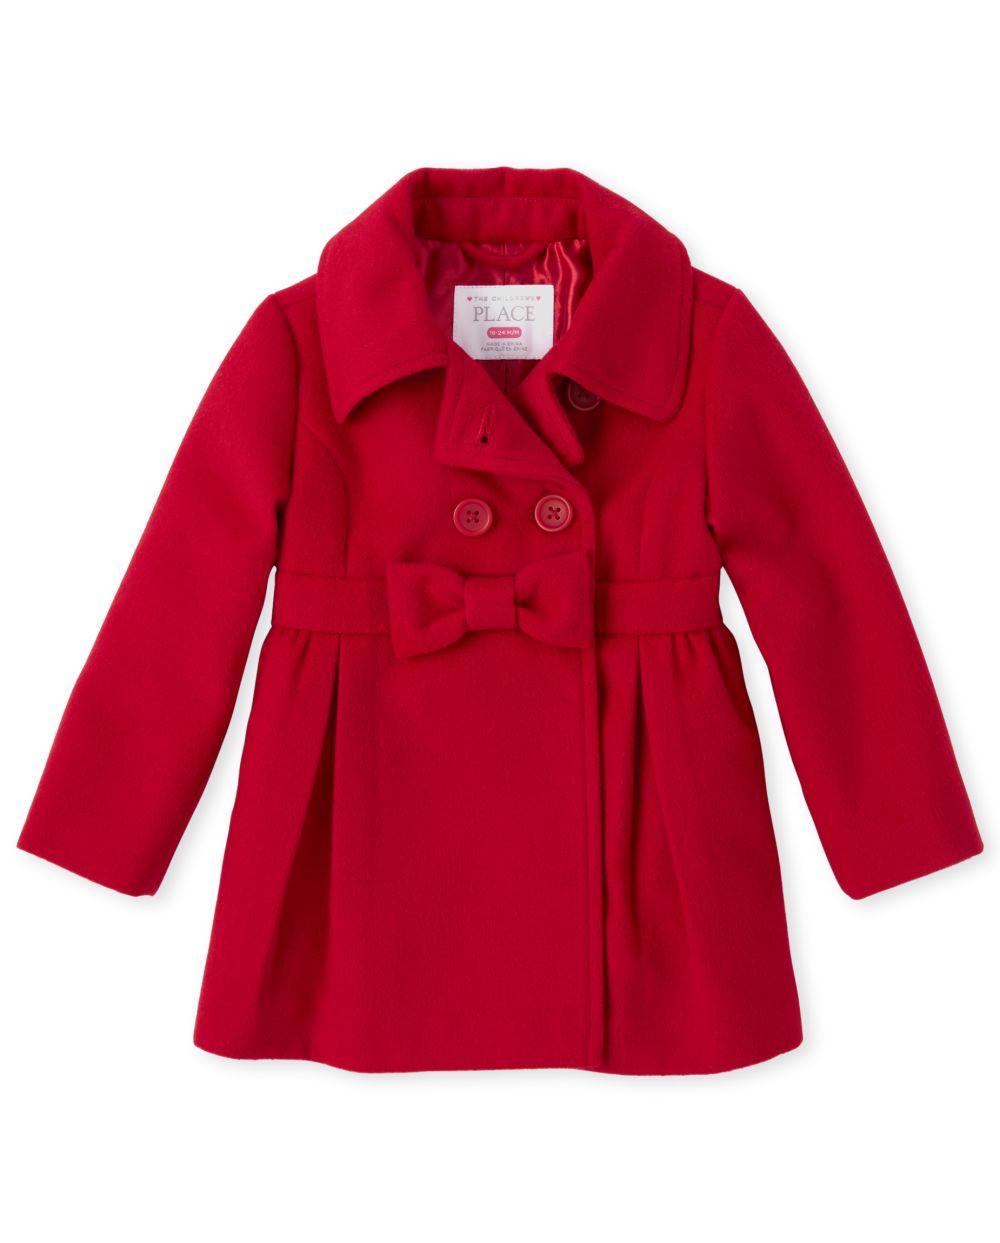 Toddler And Girls TINY COLLECTIONS Long Sleeve Dressy Pea Coat - Very Merry